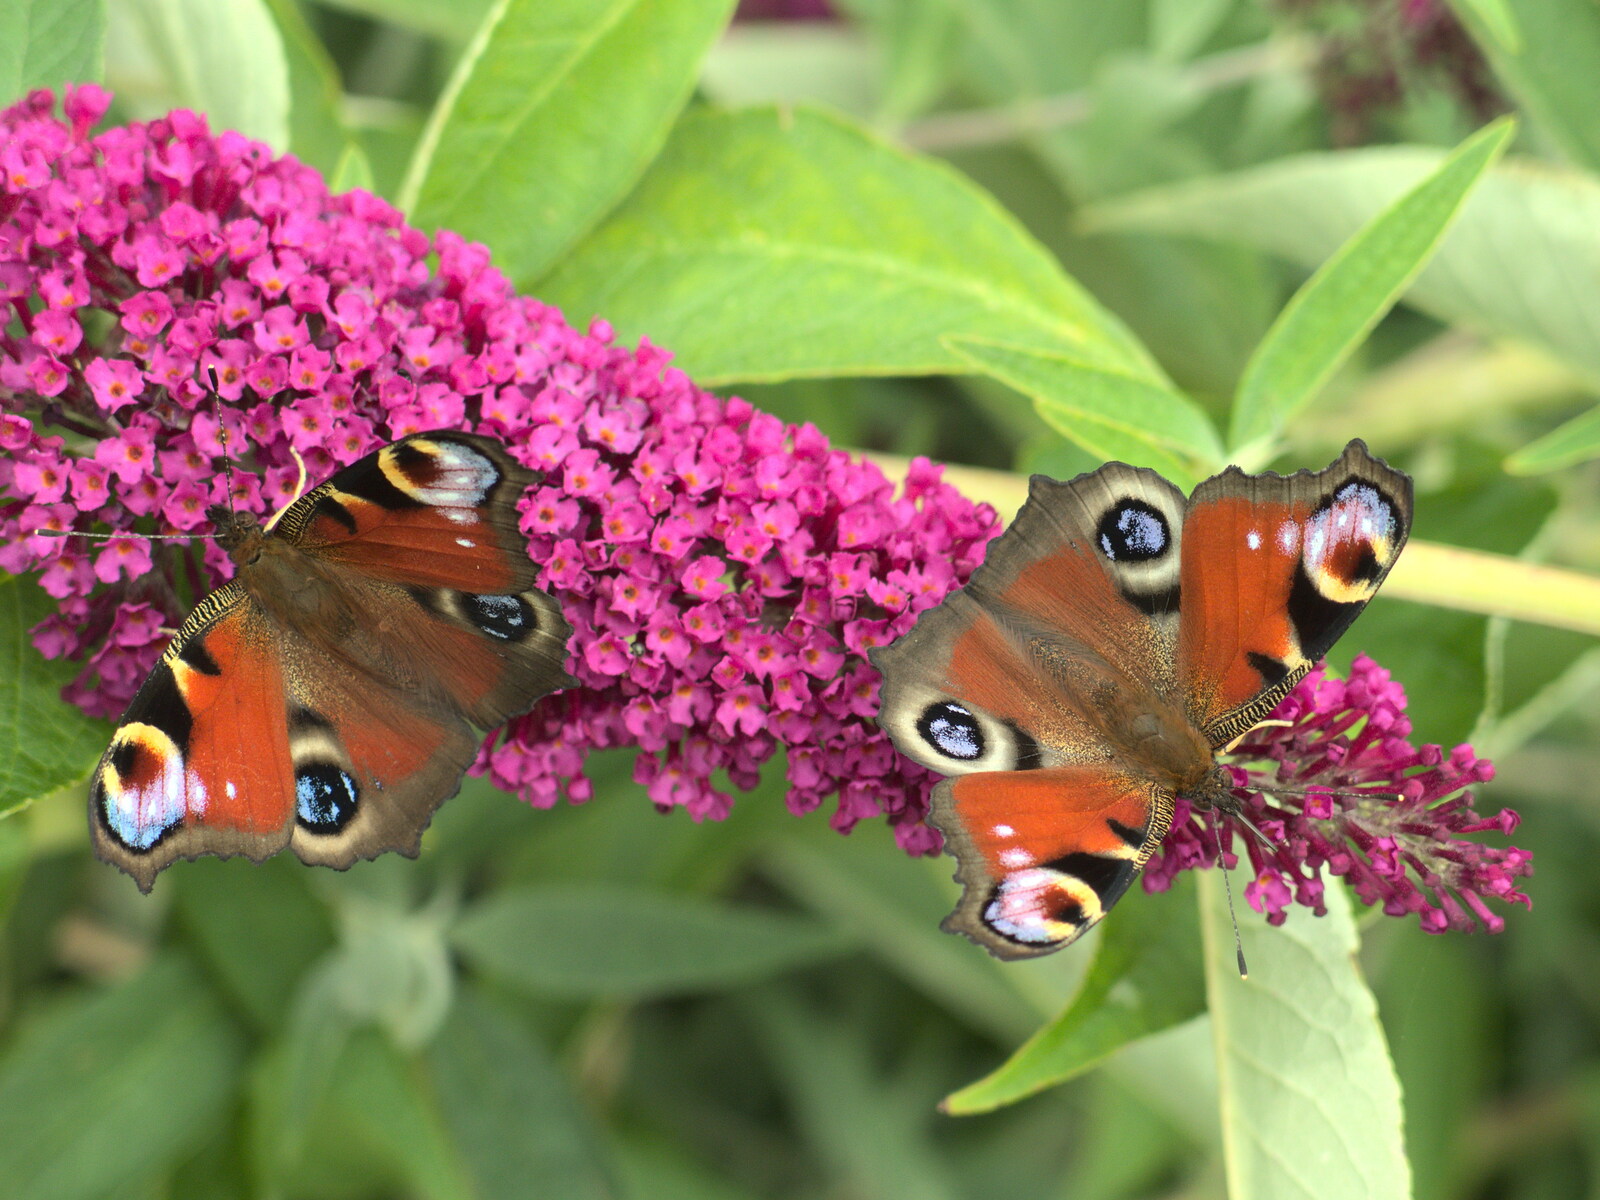 Peacock butterfies on the buddleia from The BSCC at Harleston, and a Visit From Cambridge, Brome, Suffolk - 31st July 2014